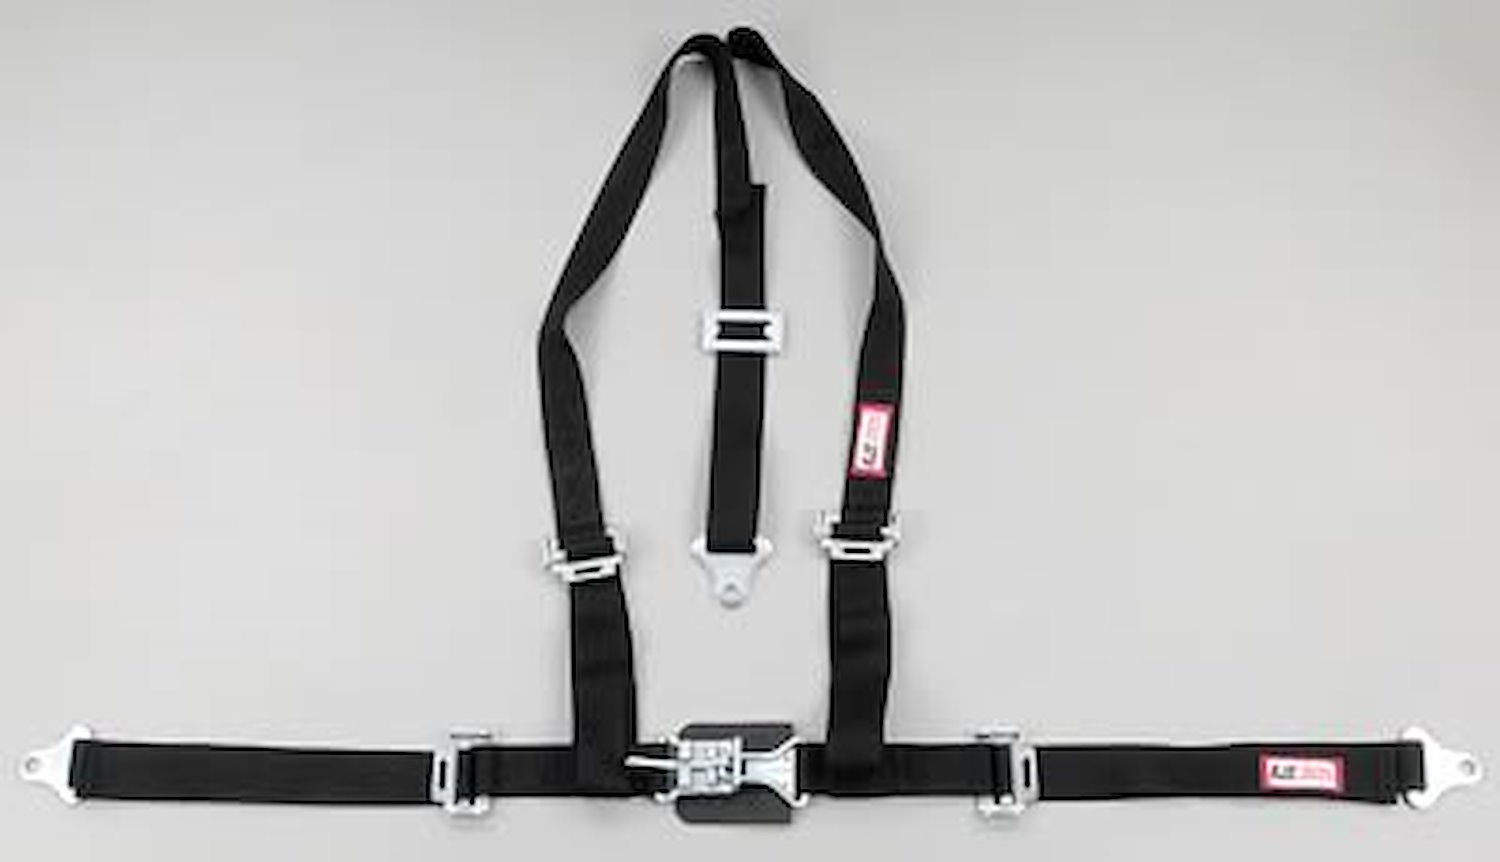 NON-SFI L&L HARNESS 2 PULL UP Lap Belt SNAP SEWN IN 2 S.H. V ROLL BAR Mount w/STERNUM STRAP BOLT RED